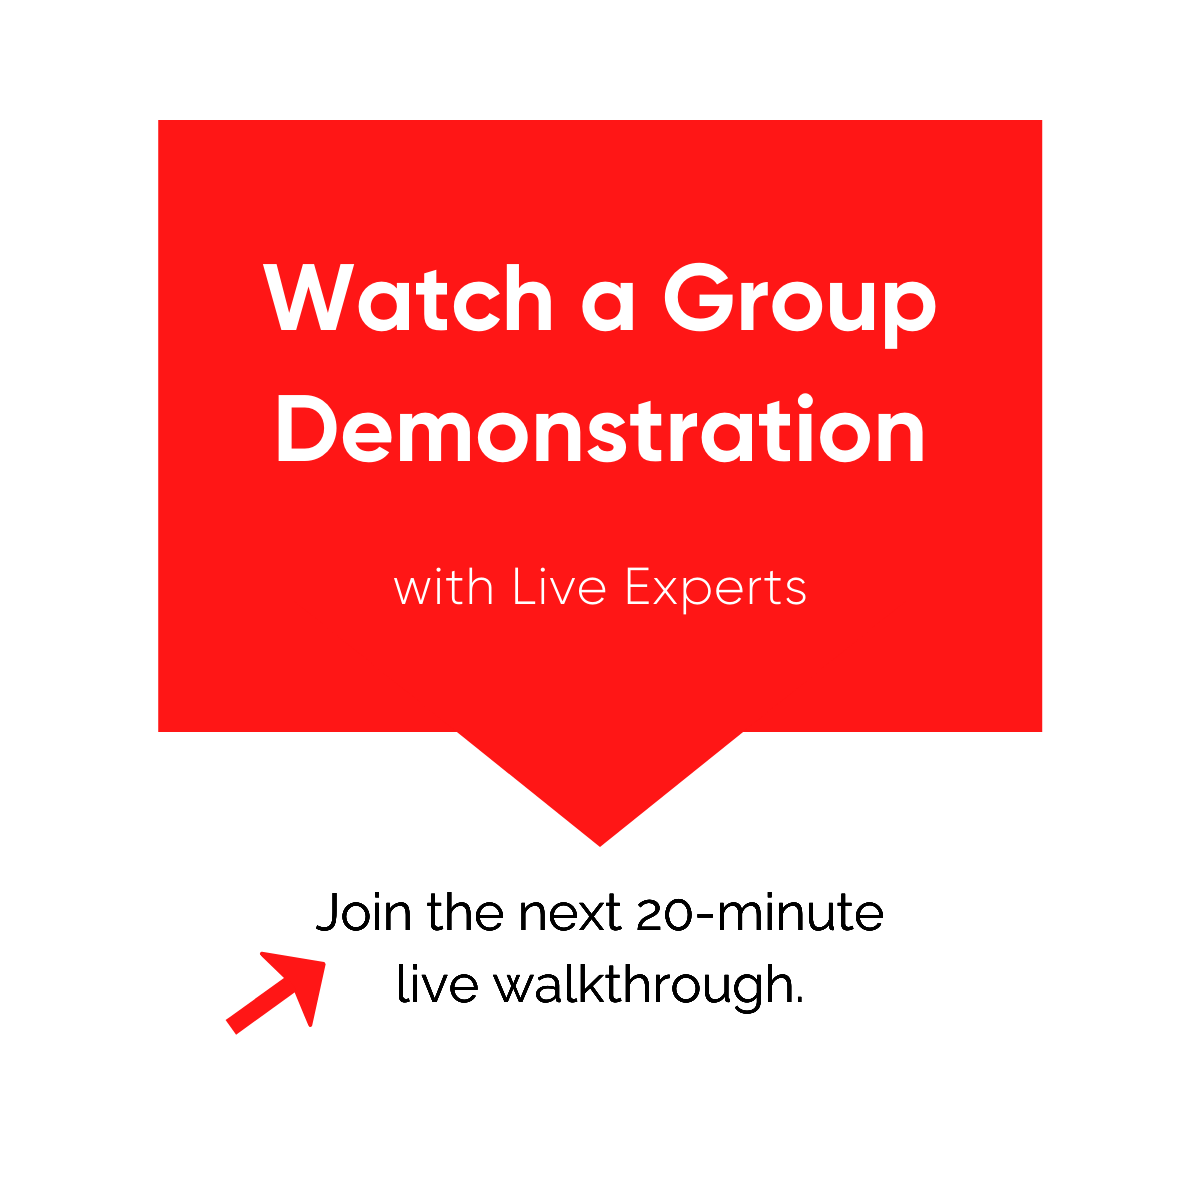 Watch a Group Demonstration